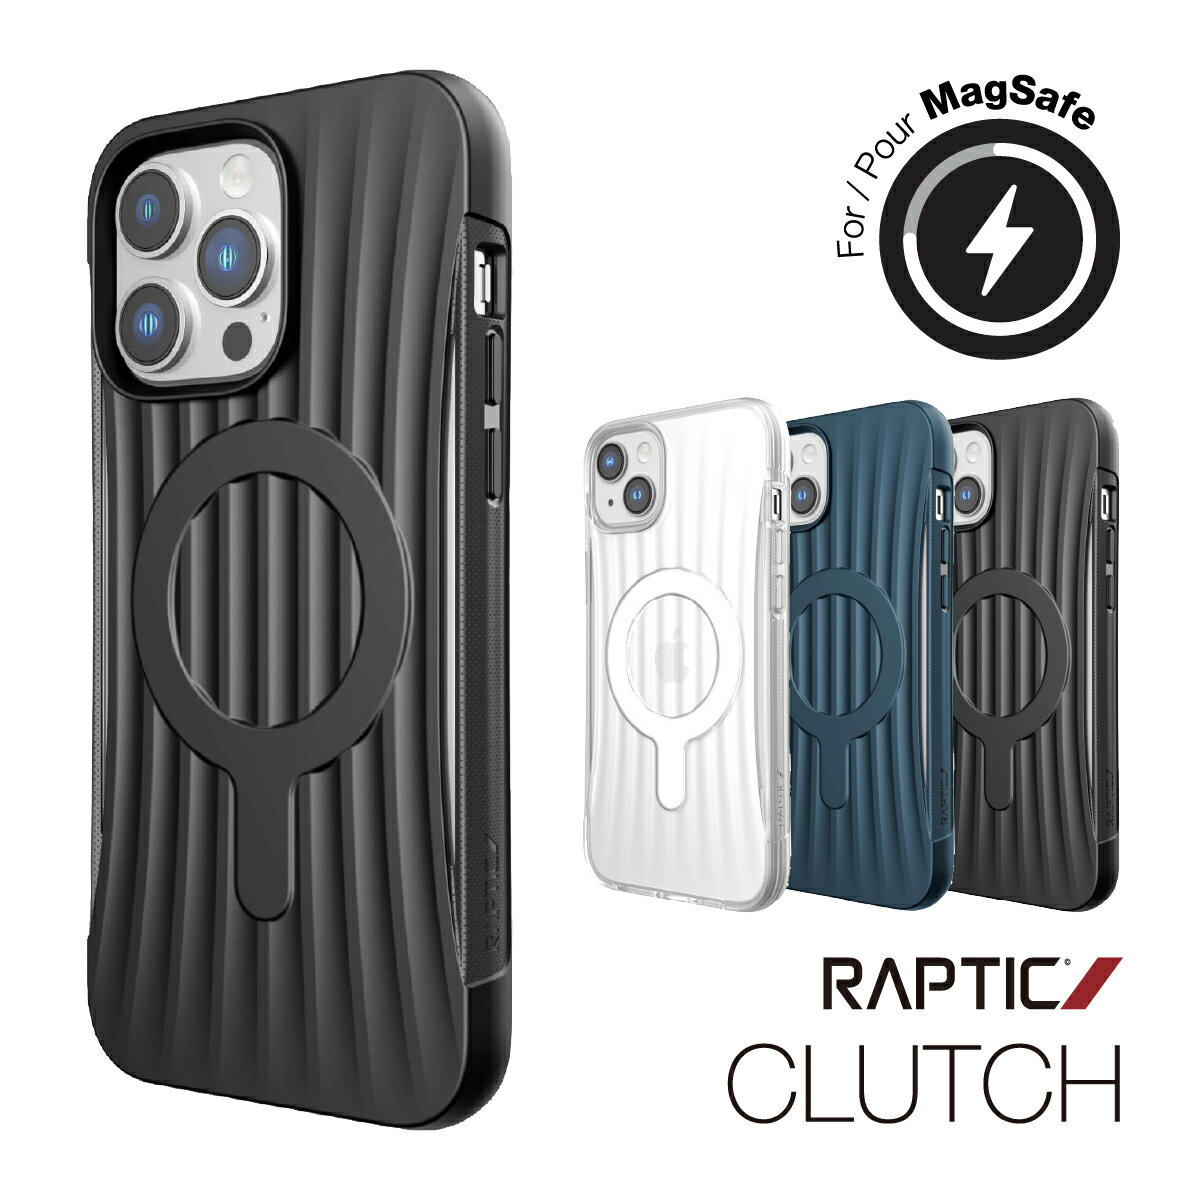 iPhone14 P[X Jo[ MagSafe Ή }Olbg t ČRMILKi NA Vv X}zP[X ϏՌ }OZ[tΉP[X ^  X}zJo[ ΏՌ gуP[X [ Apple iPhone 14 Abv ACtH / ACtH14 Ή ] RAPTIC Clutch MagSafe